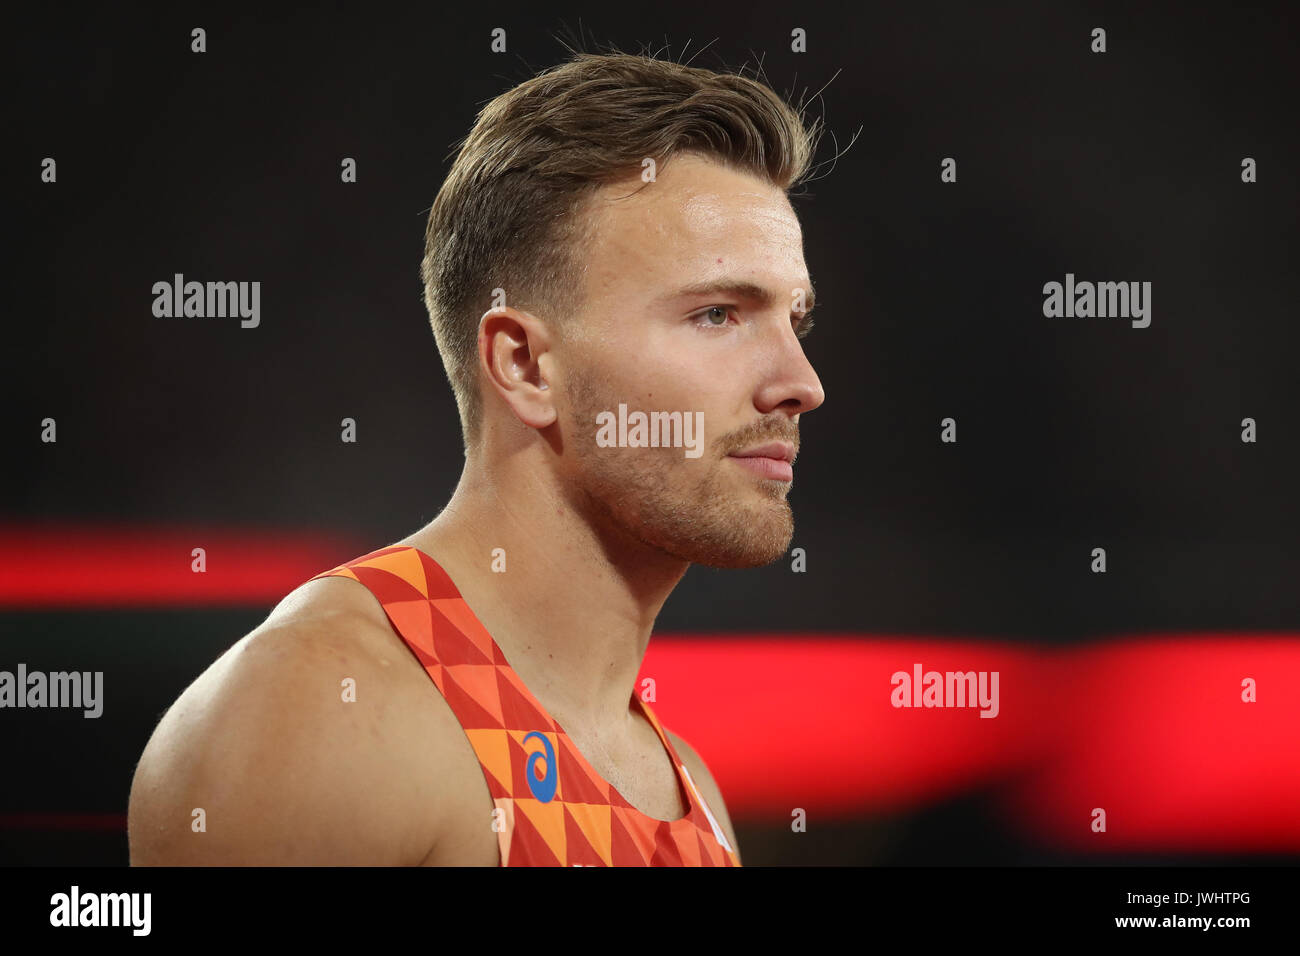 Netherland's Pieter Braun before the 400m event of the men's Decathlon  during day eight of the 2017 IAAF World Championships at the London  Stadium. PRESS ASSOCIATION Photo. Picture date: Friday August 11,